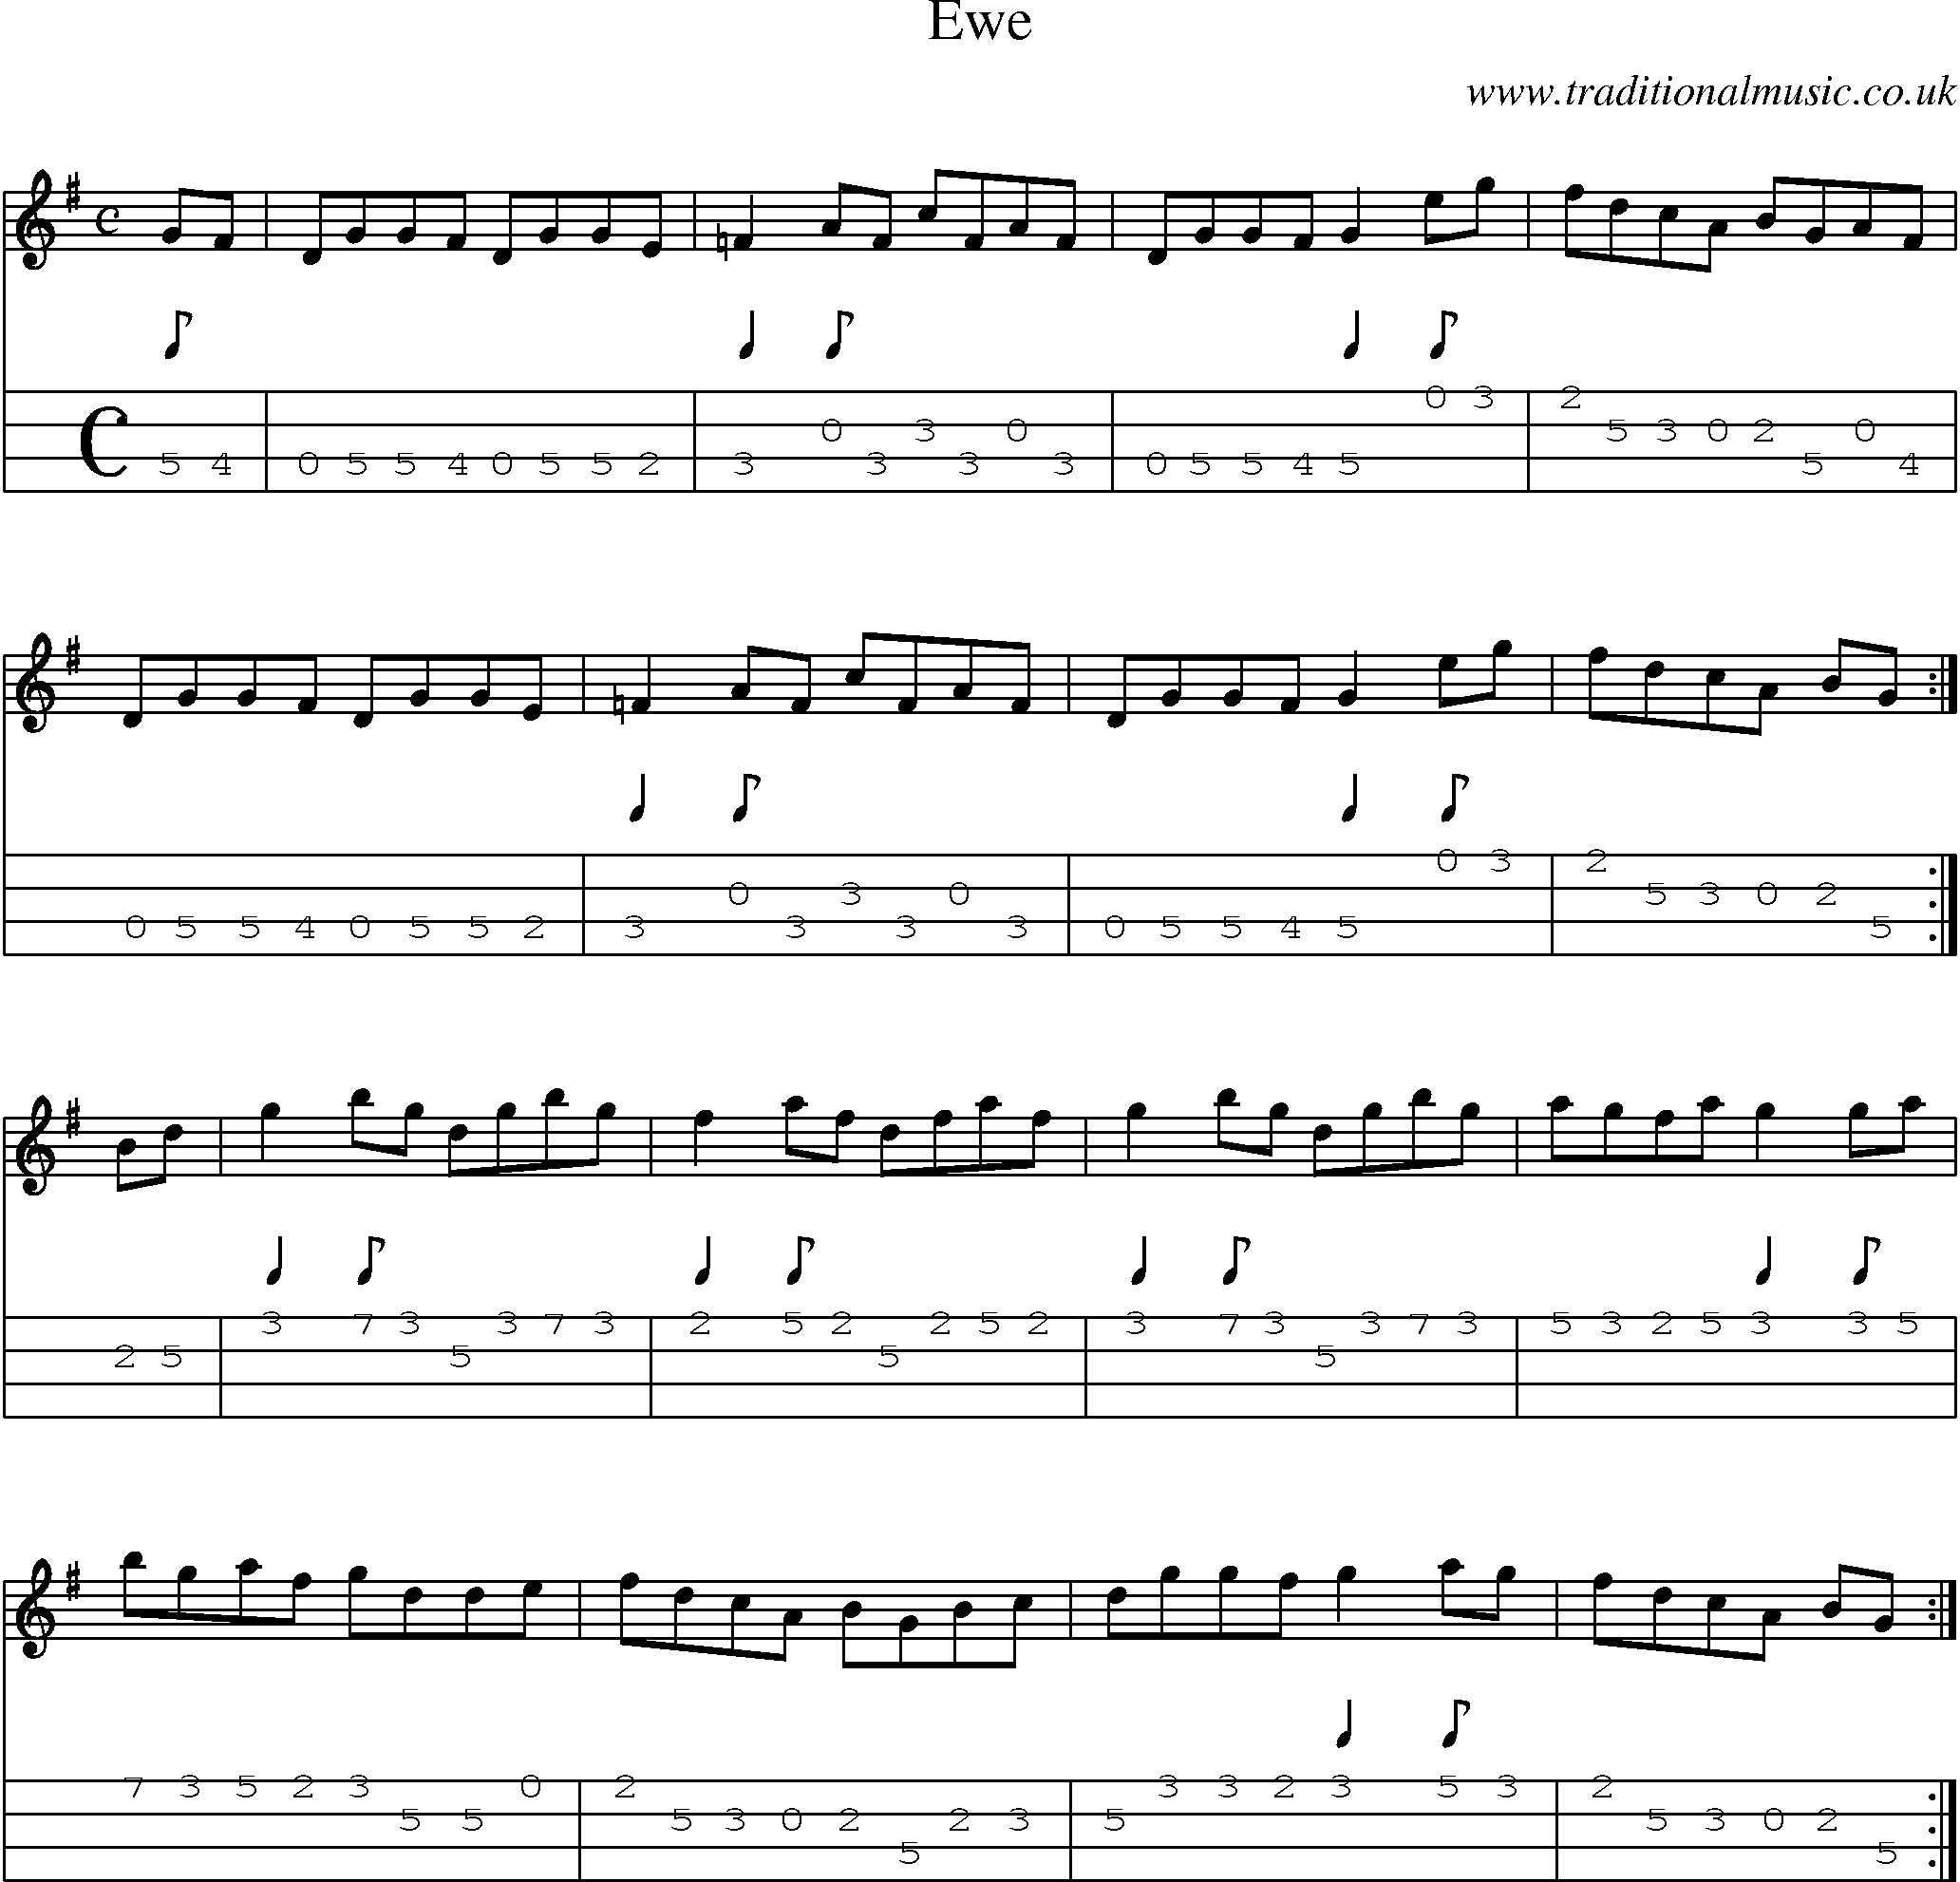 Music Score and Mandolin Tabs for Ewe